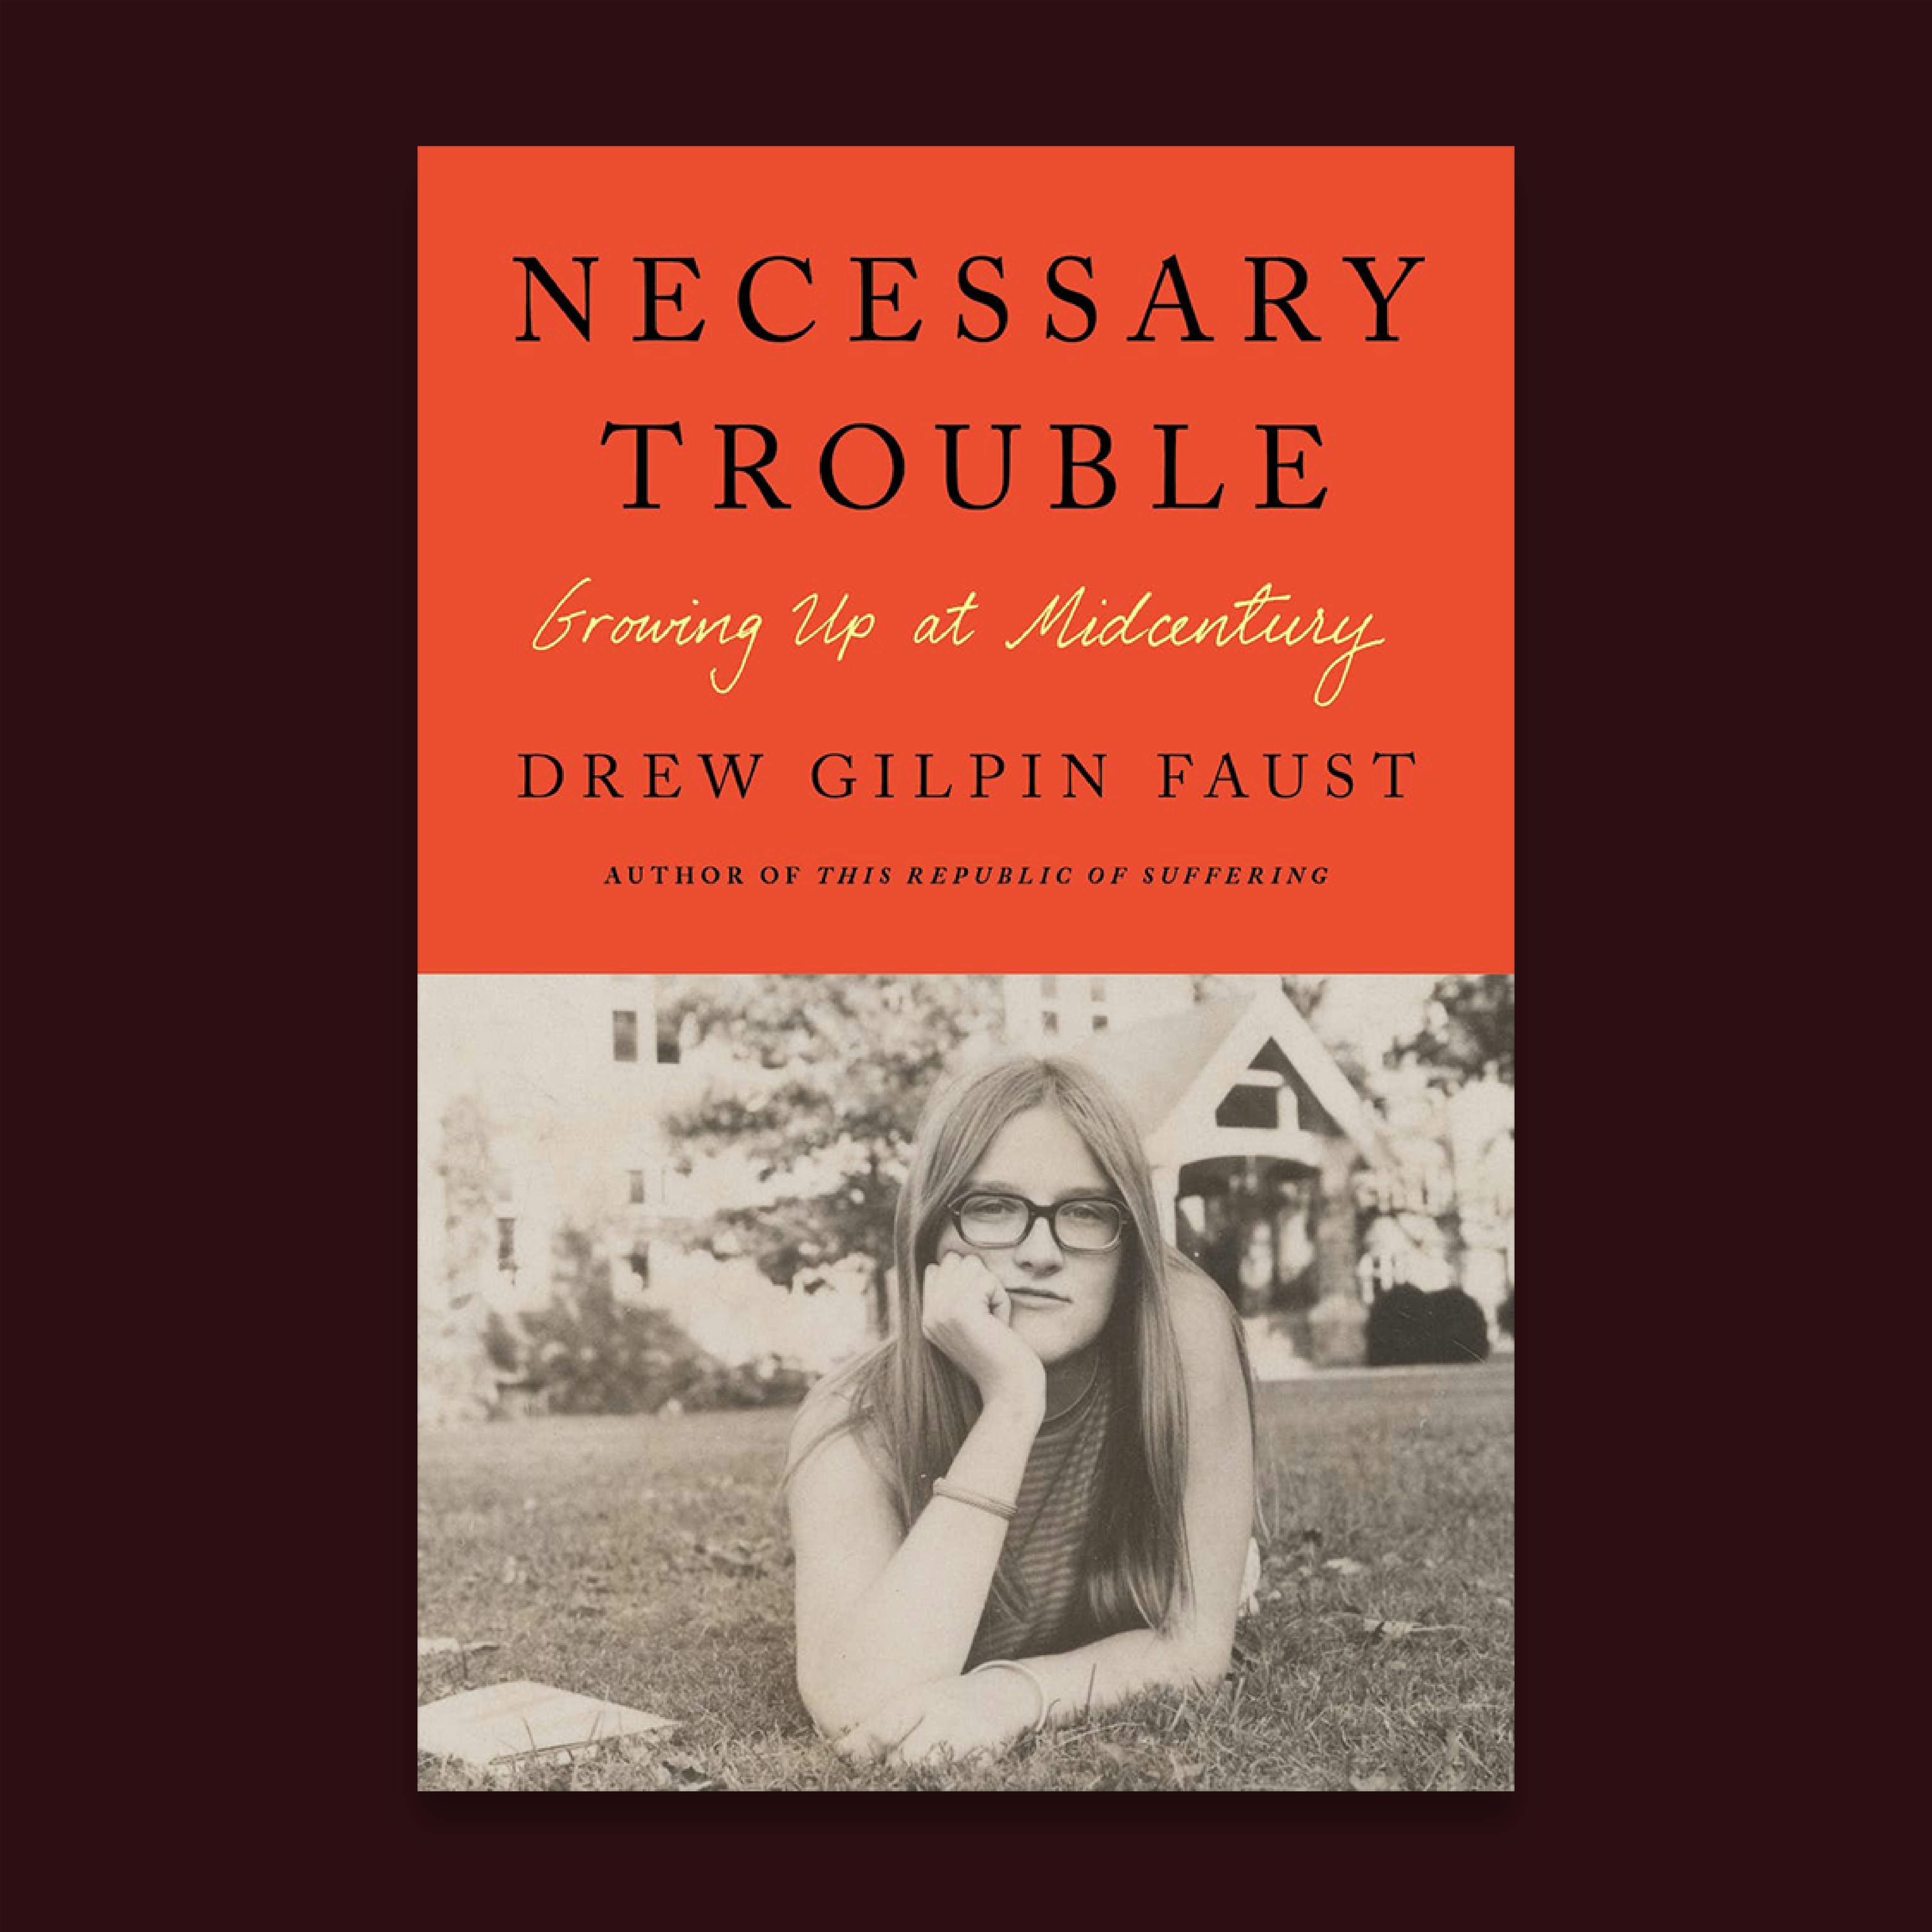 Image of book cover Necessary Trouble by Drew Gilpin Faust